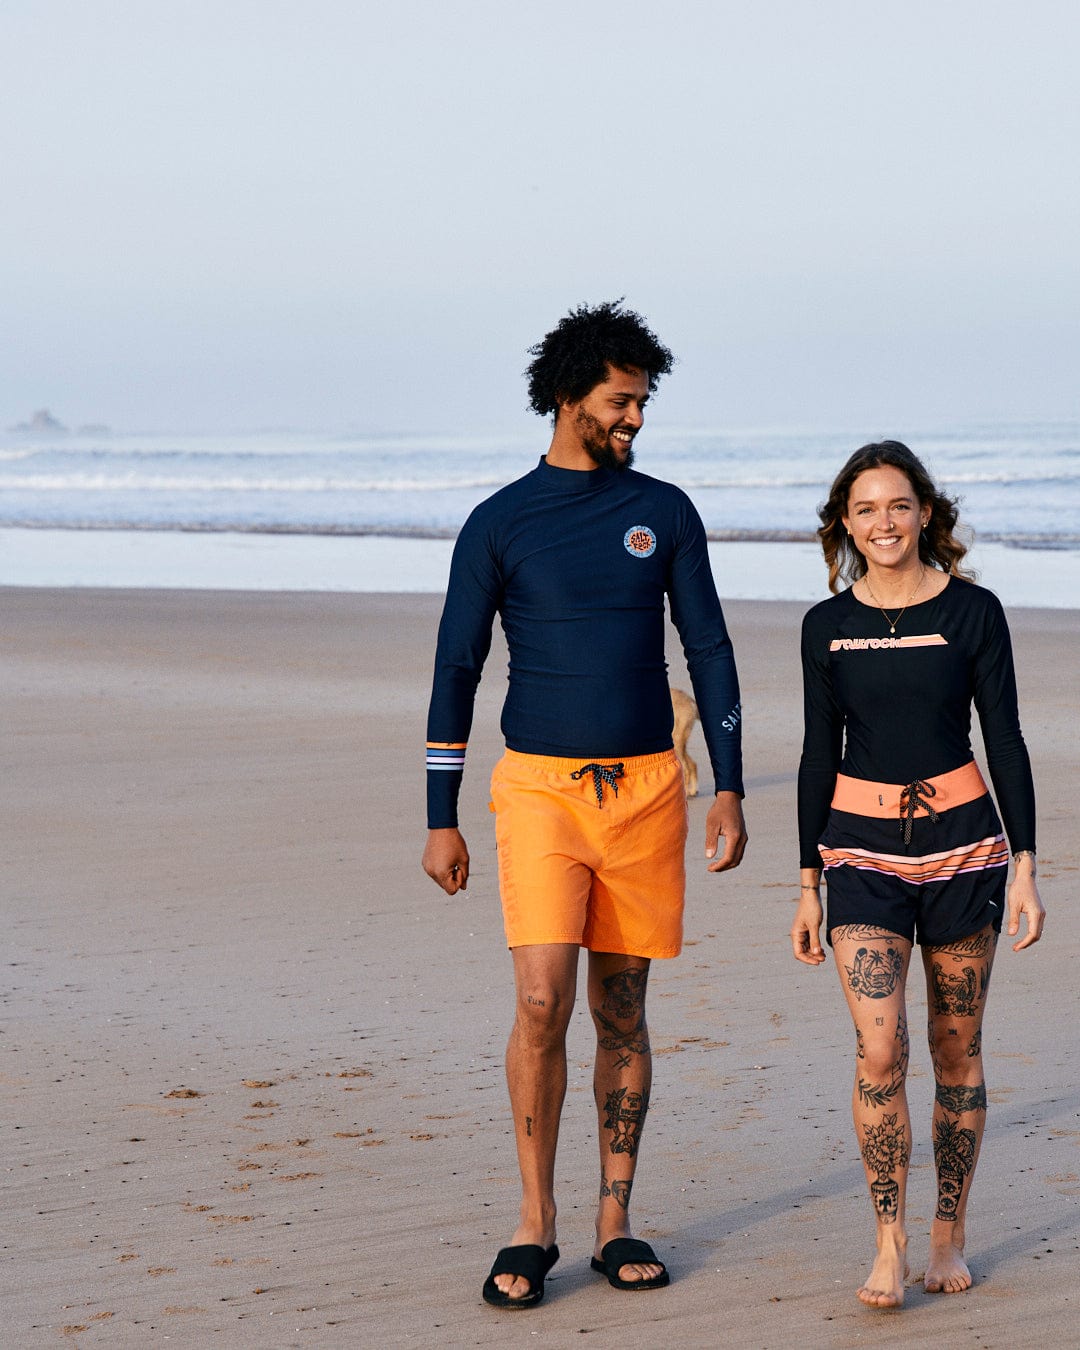 A man and a woman walking on a beach, both wearing Saltrock Cora Retro - Recycled long sleeve swimsuits in dark grey, smiling and looking at each other.